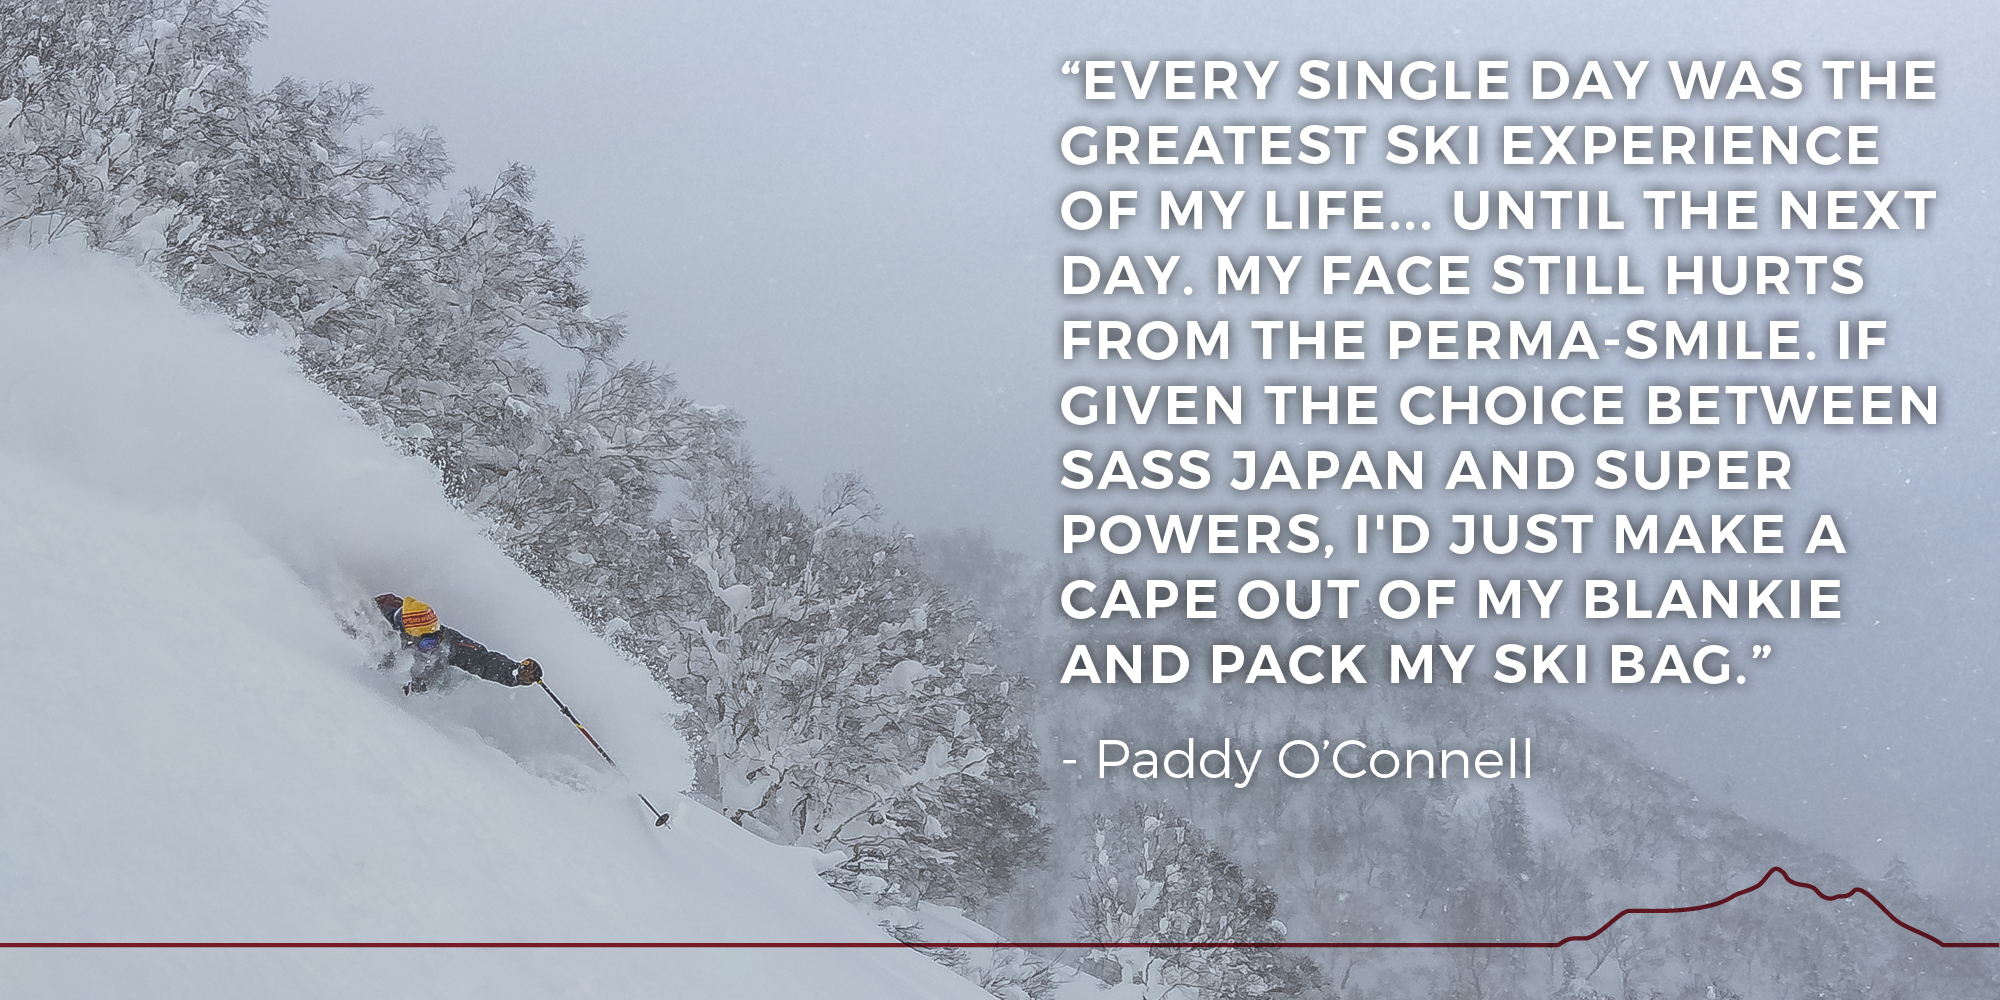 Every single day was the greatest ski experience of my life... until the next day. My face still hurts from the perma-smile. If given the choice between SASS Japan and super powers, I'd just make a cape out of my blankie and pack my ski bag. - Paddy O'Connell